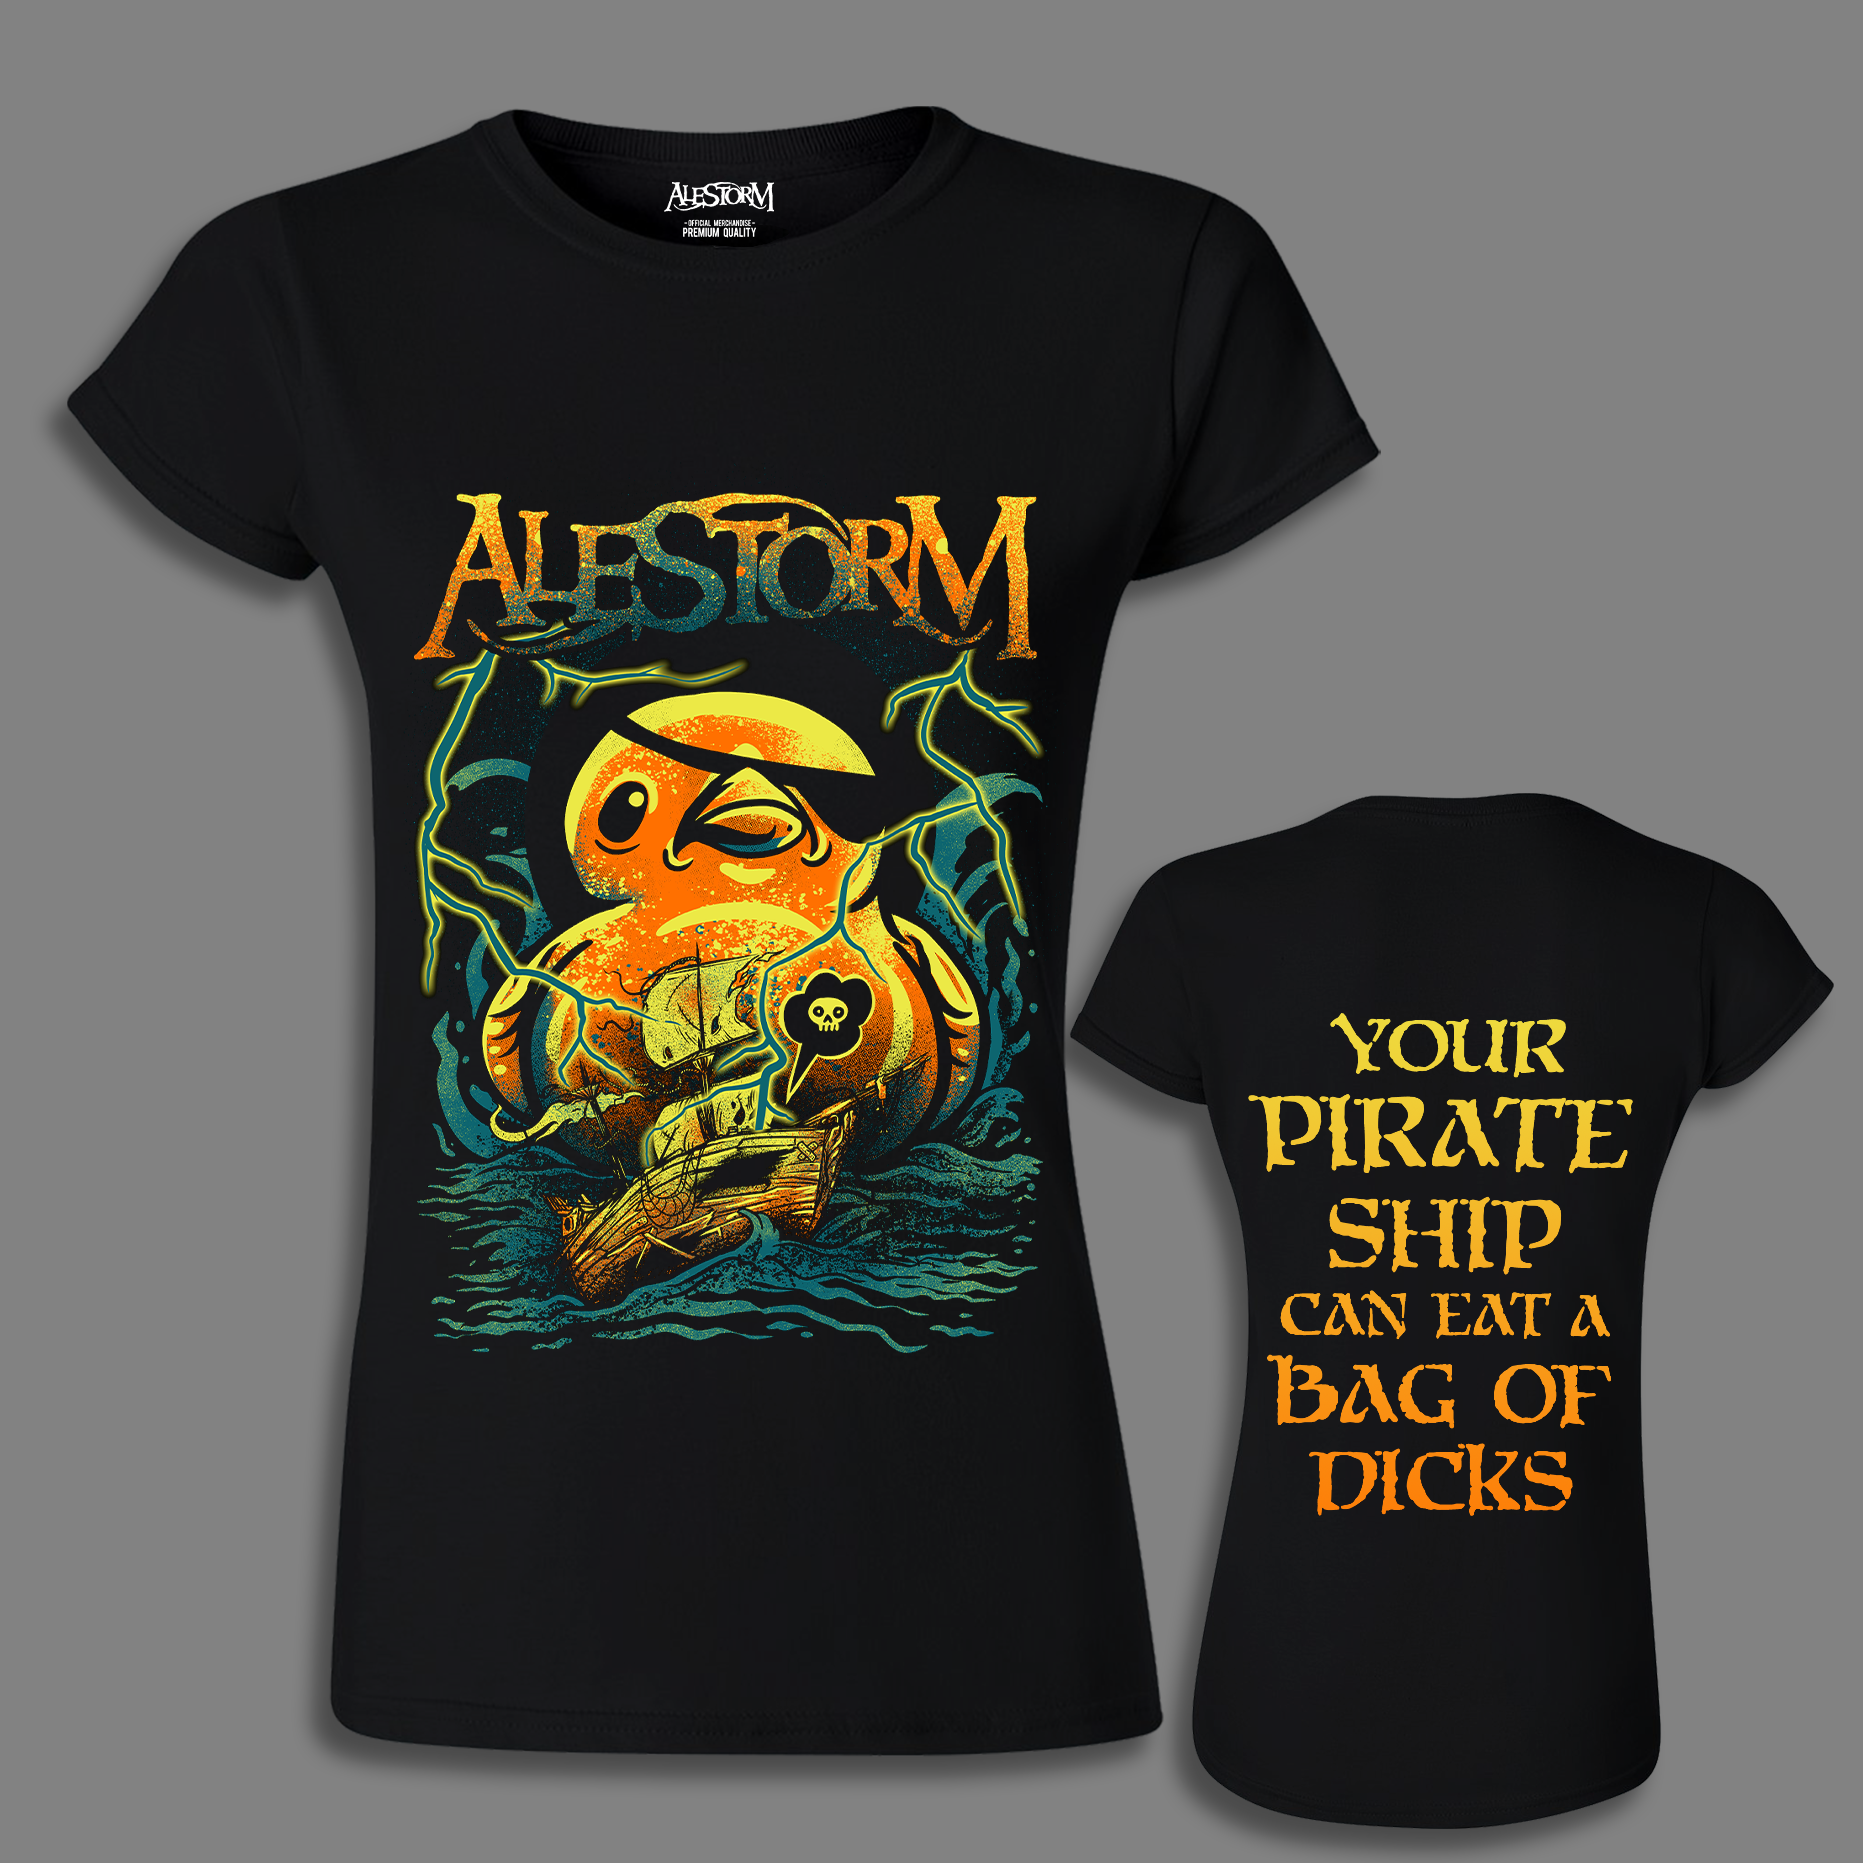 'Your Pirate Ship Can Eat a Bag of Dicks' Girlie Shirt – Alestorm ...